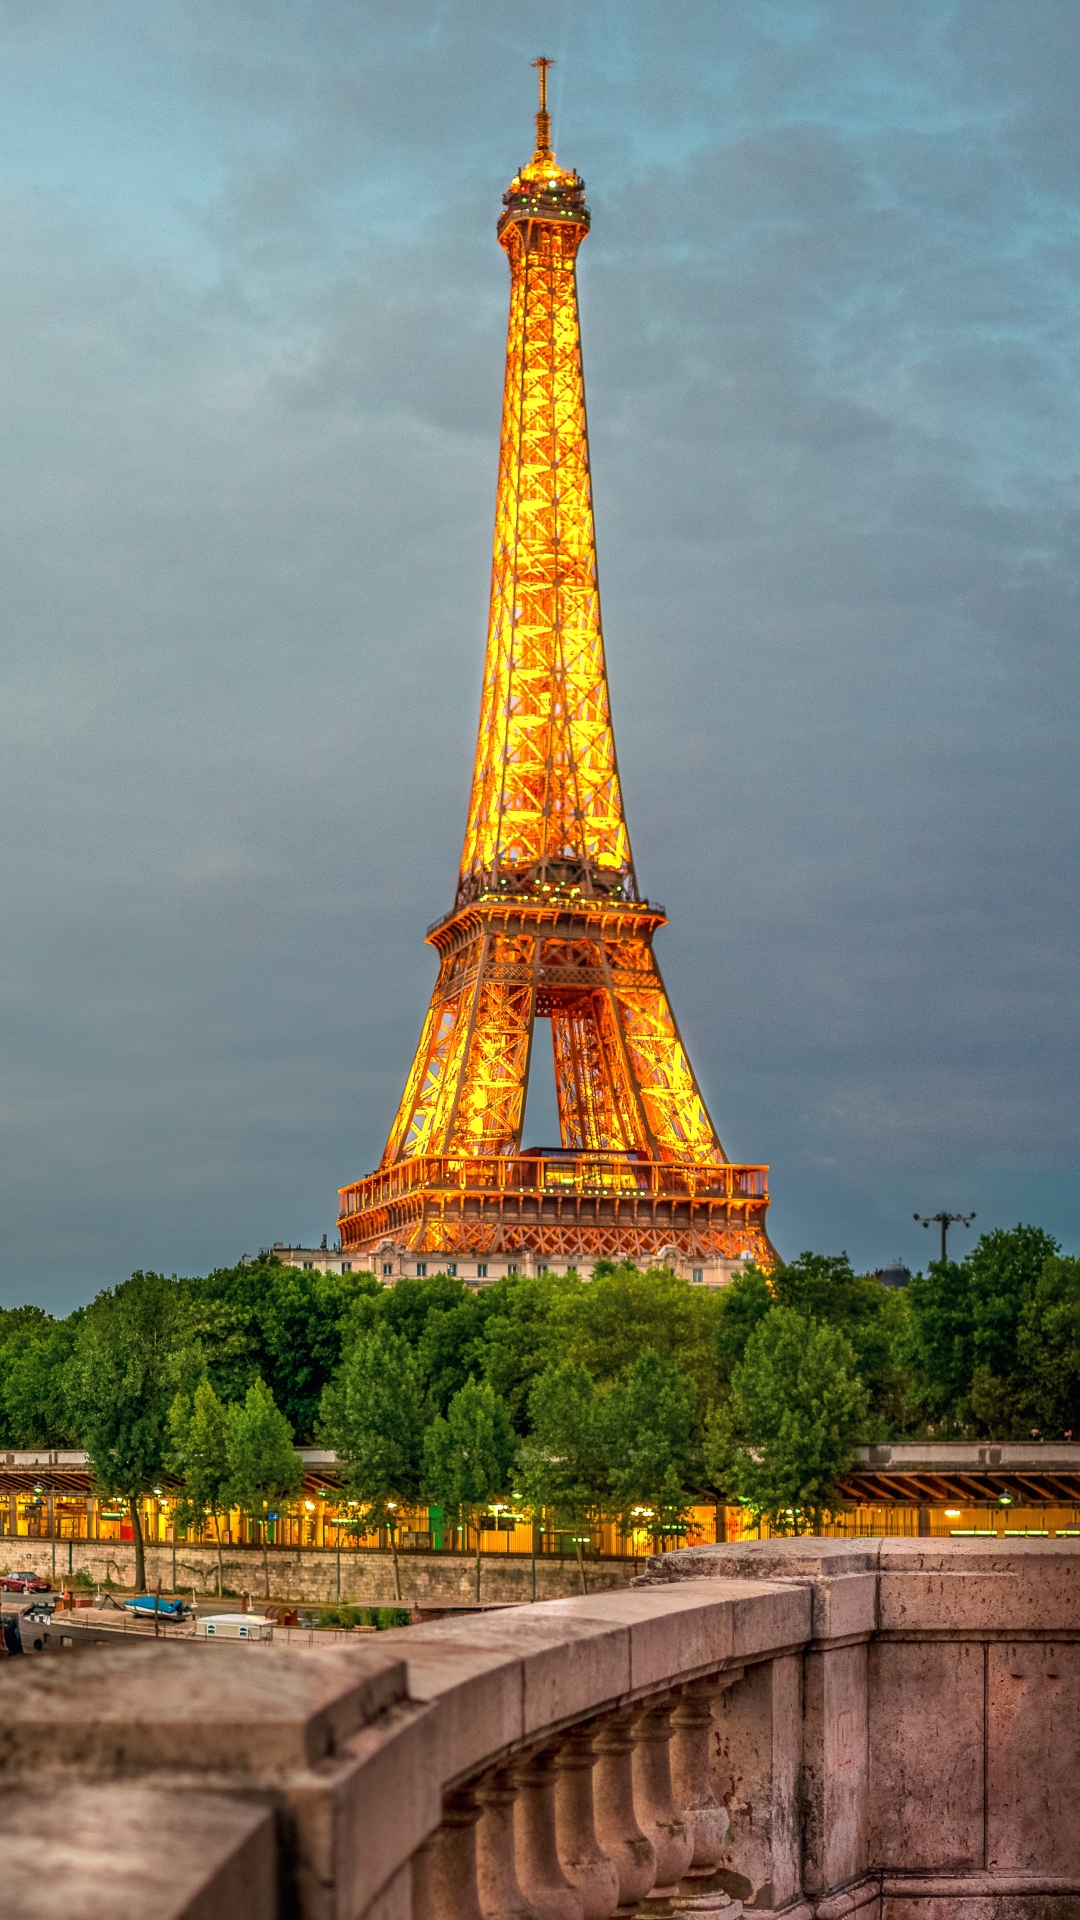 View of Eiffel Tower from the Seine River